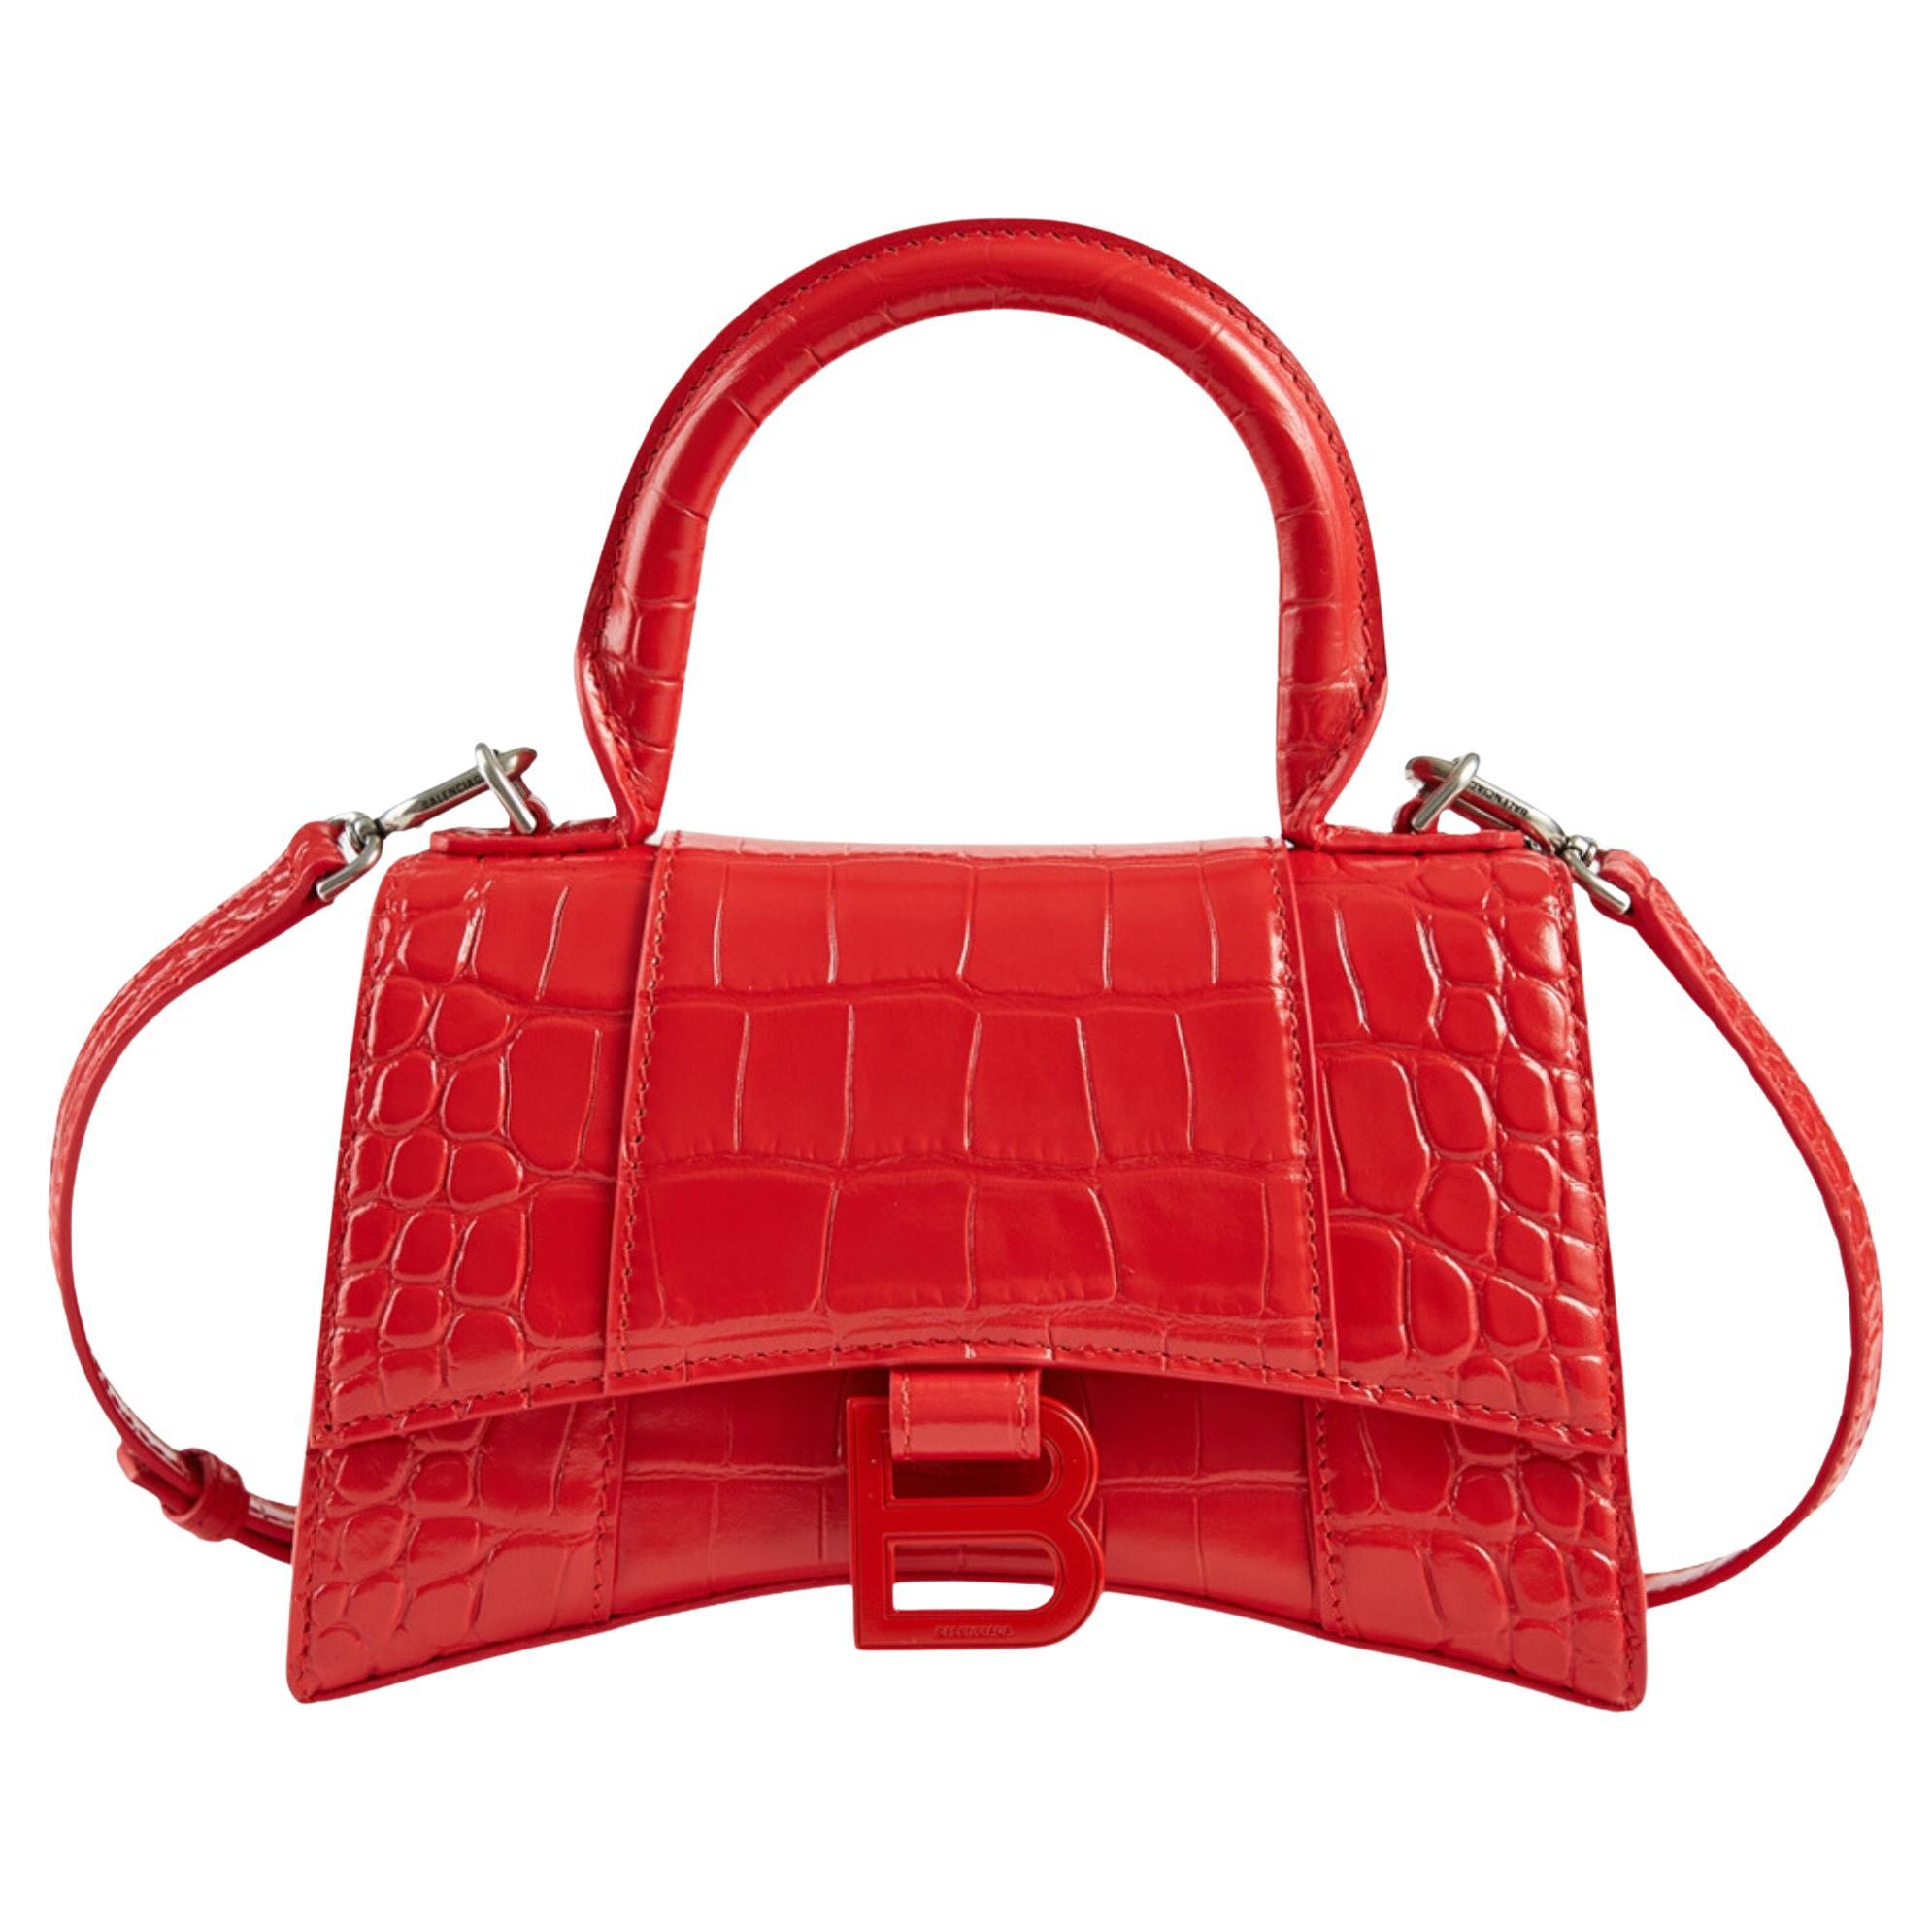 Balenciaga Croc-embossed Leather Red Hourglass Bag Extra Small For Sale